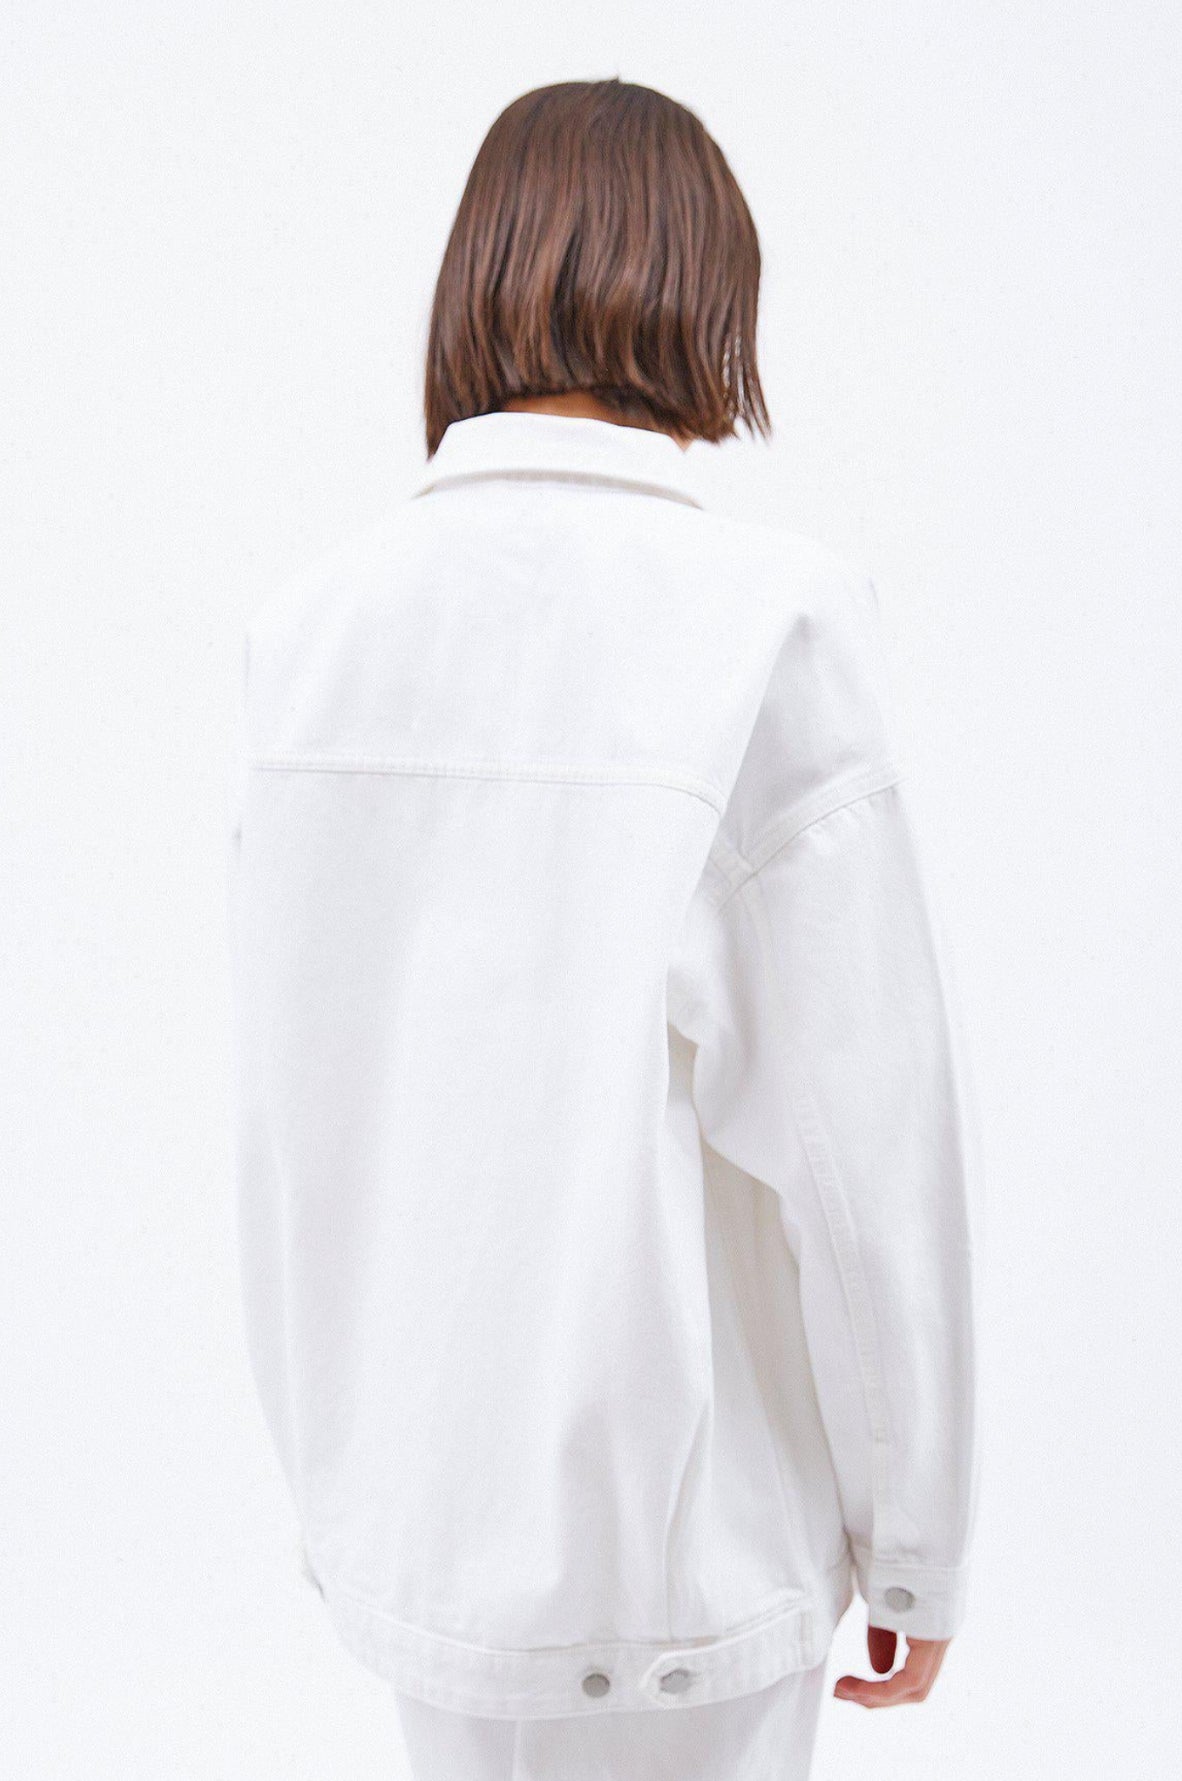 Ina Worker Jacket in White